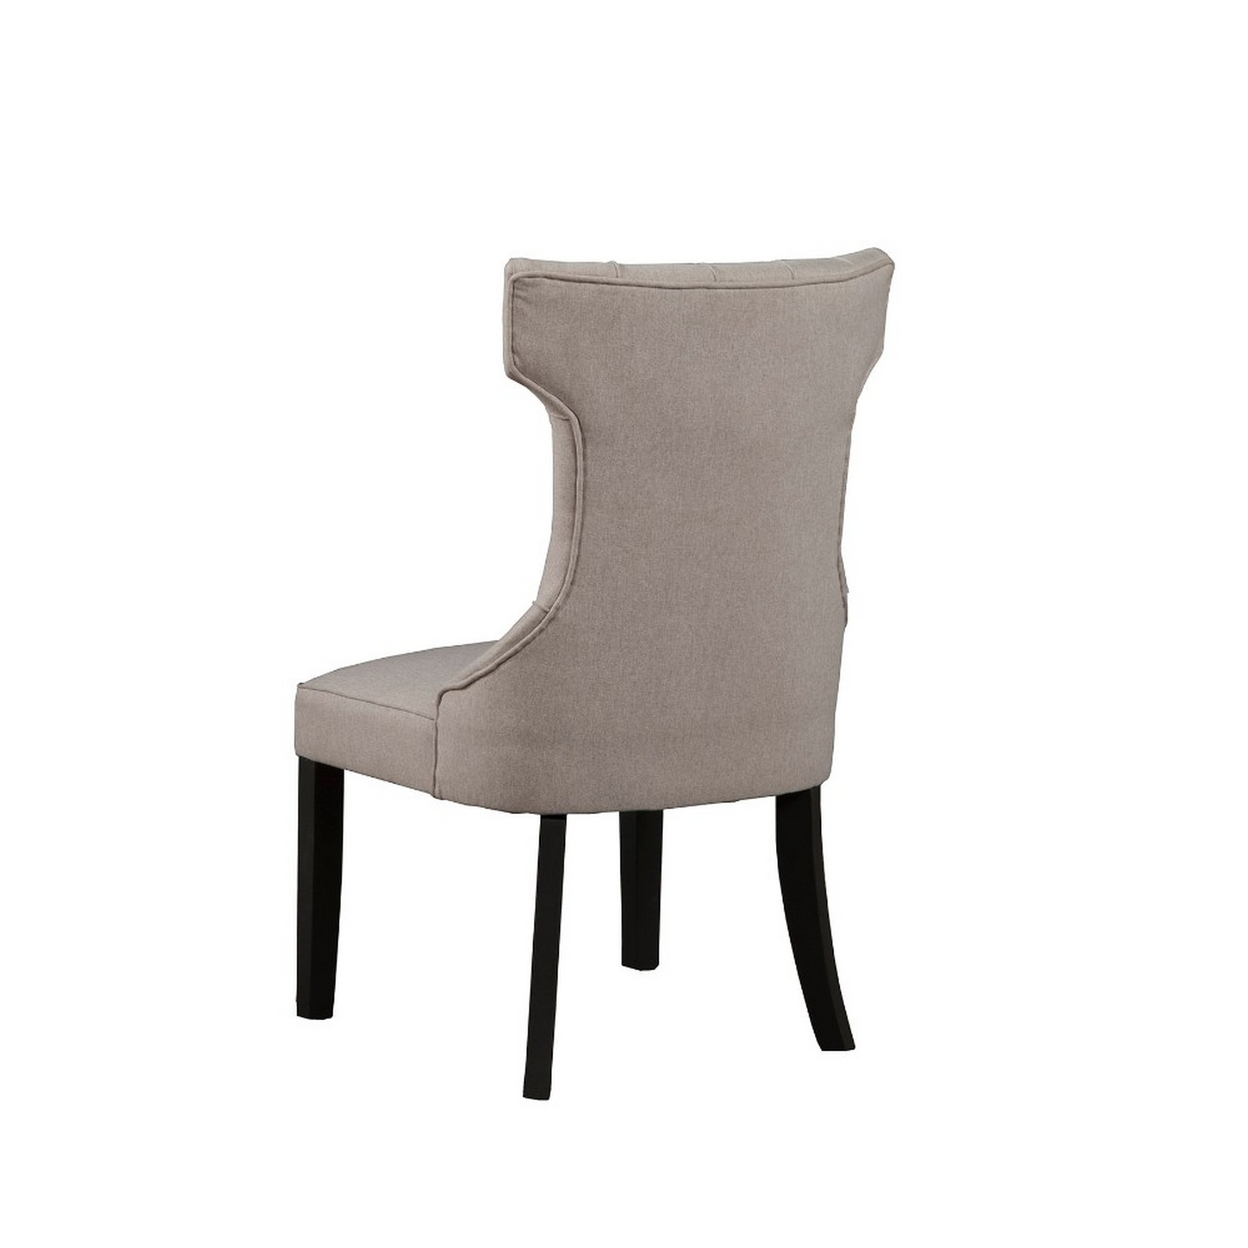 Upholstered Button Tufted Side Chairs With Wooden Base Set Of 2 Gray- Saltoro Sherpi